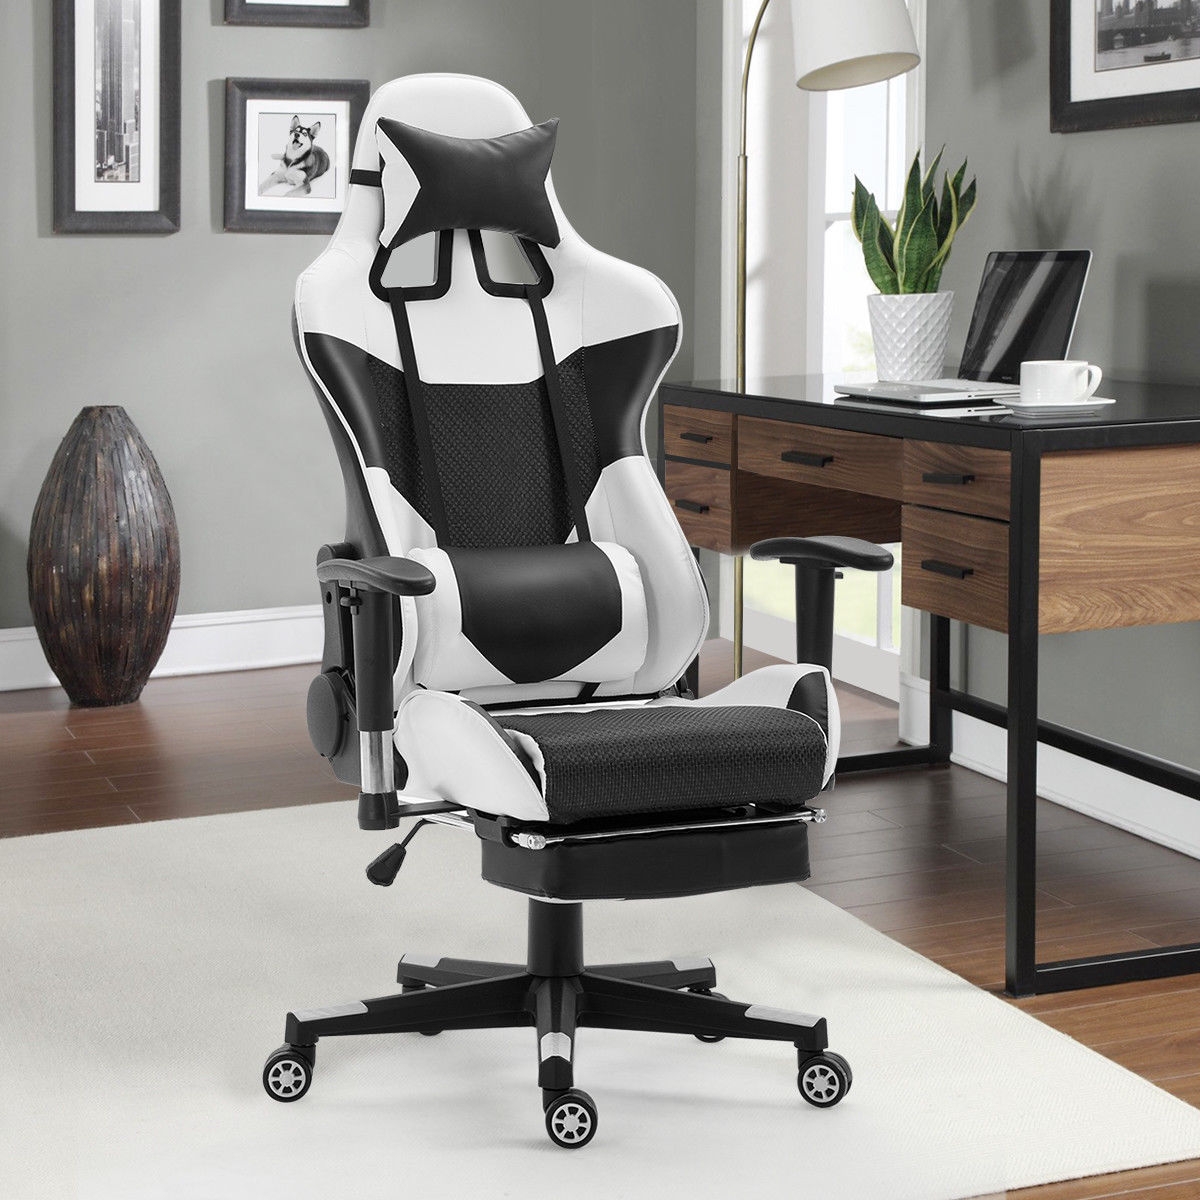 Ergonomic High Back Racing Gaming Chair w/ Lumbar Support & Footrest-White - FastSupreme | Your